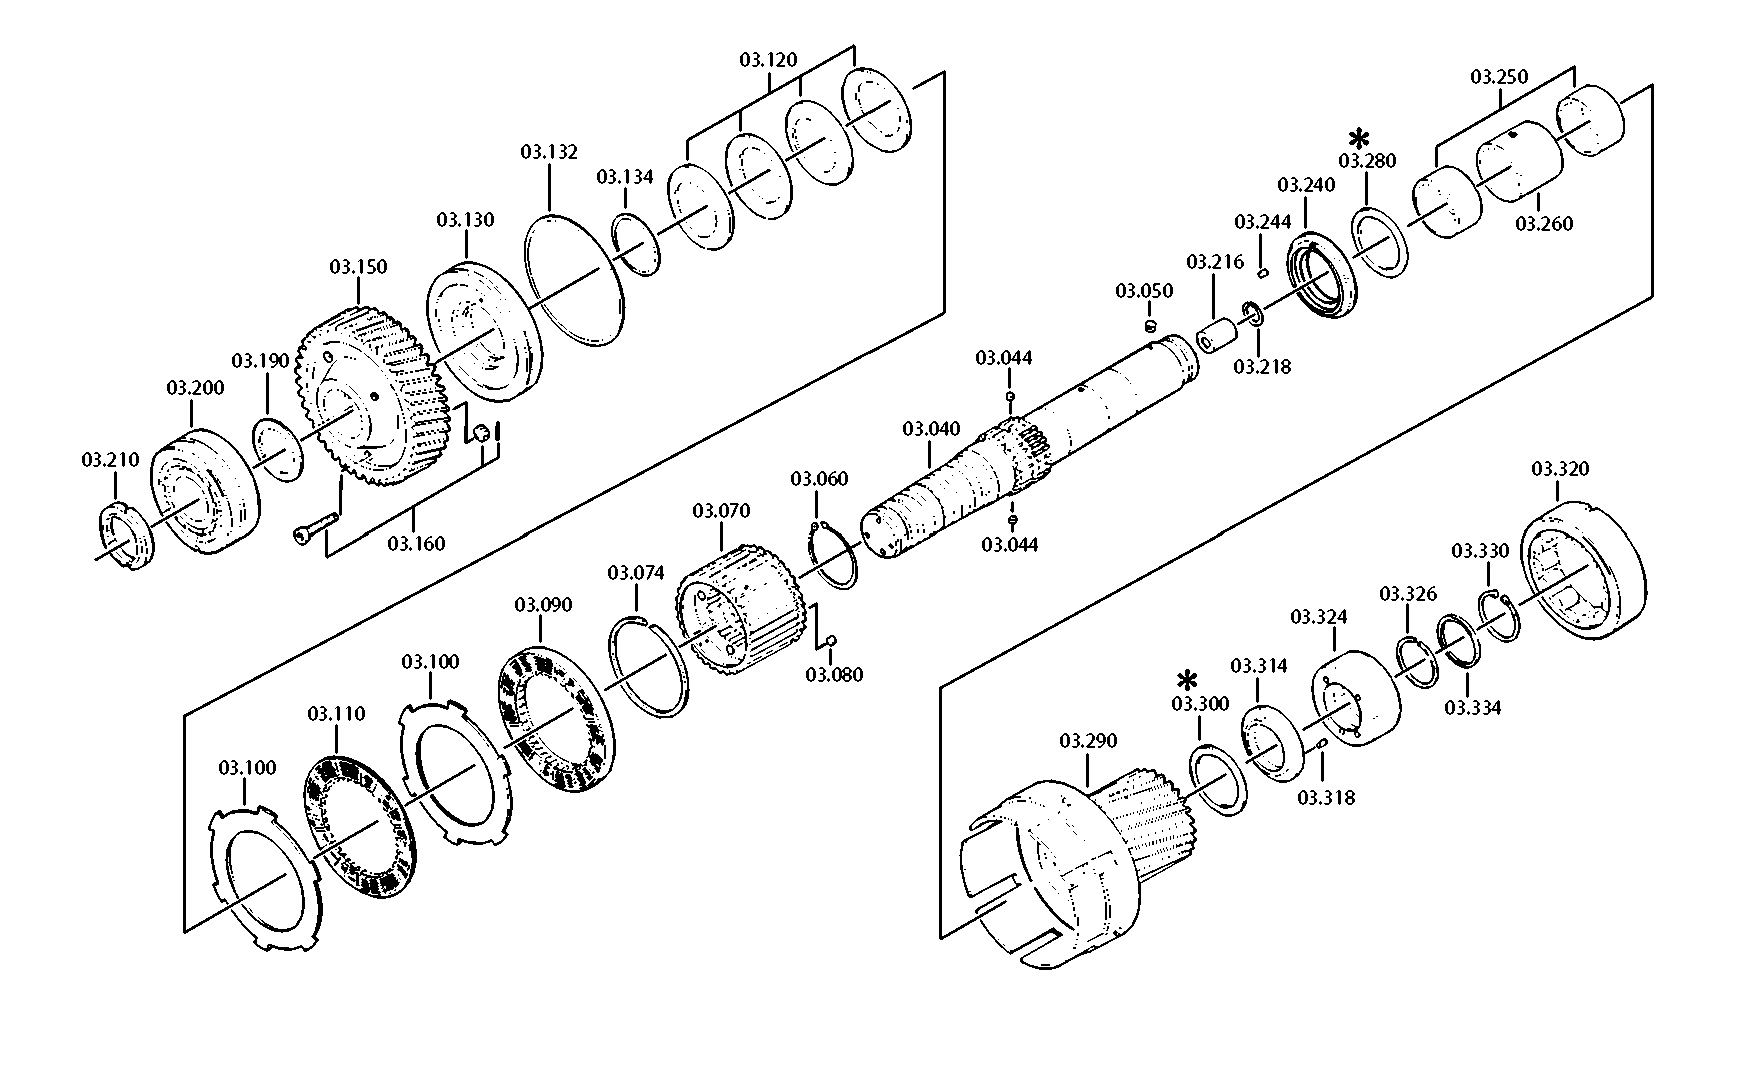 drawing for ASIA MOTORS CO. INC. 409-01-0052 - CIRCLIP (figure 1)